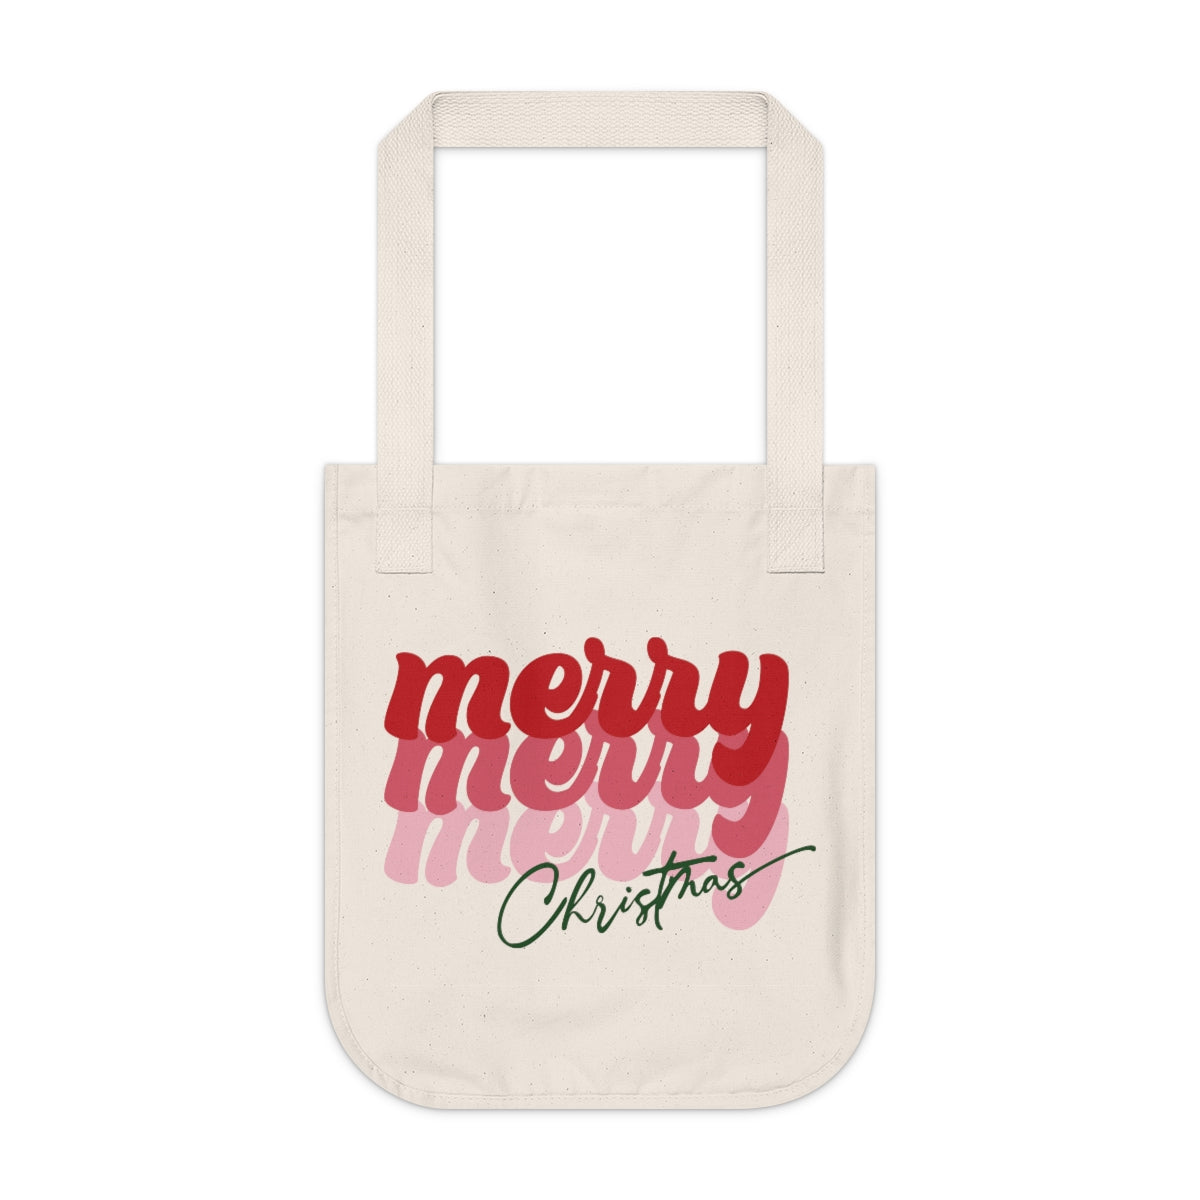 Merry Merry Merry Christmas Organic Canvas Tote Bag